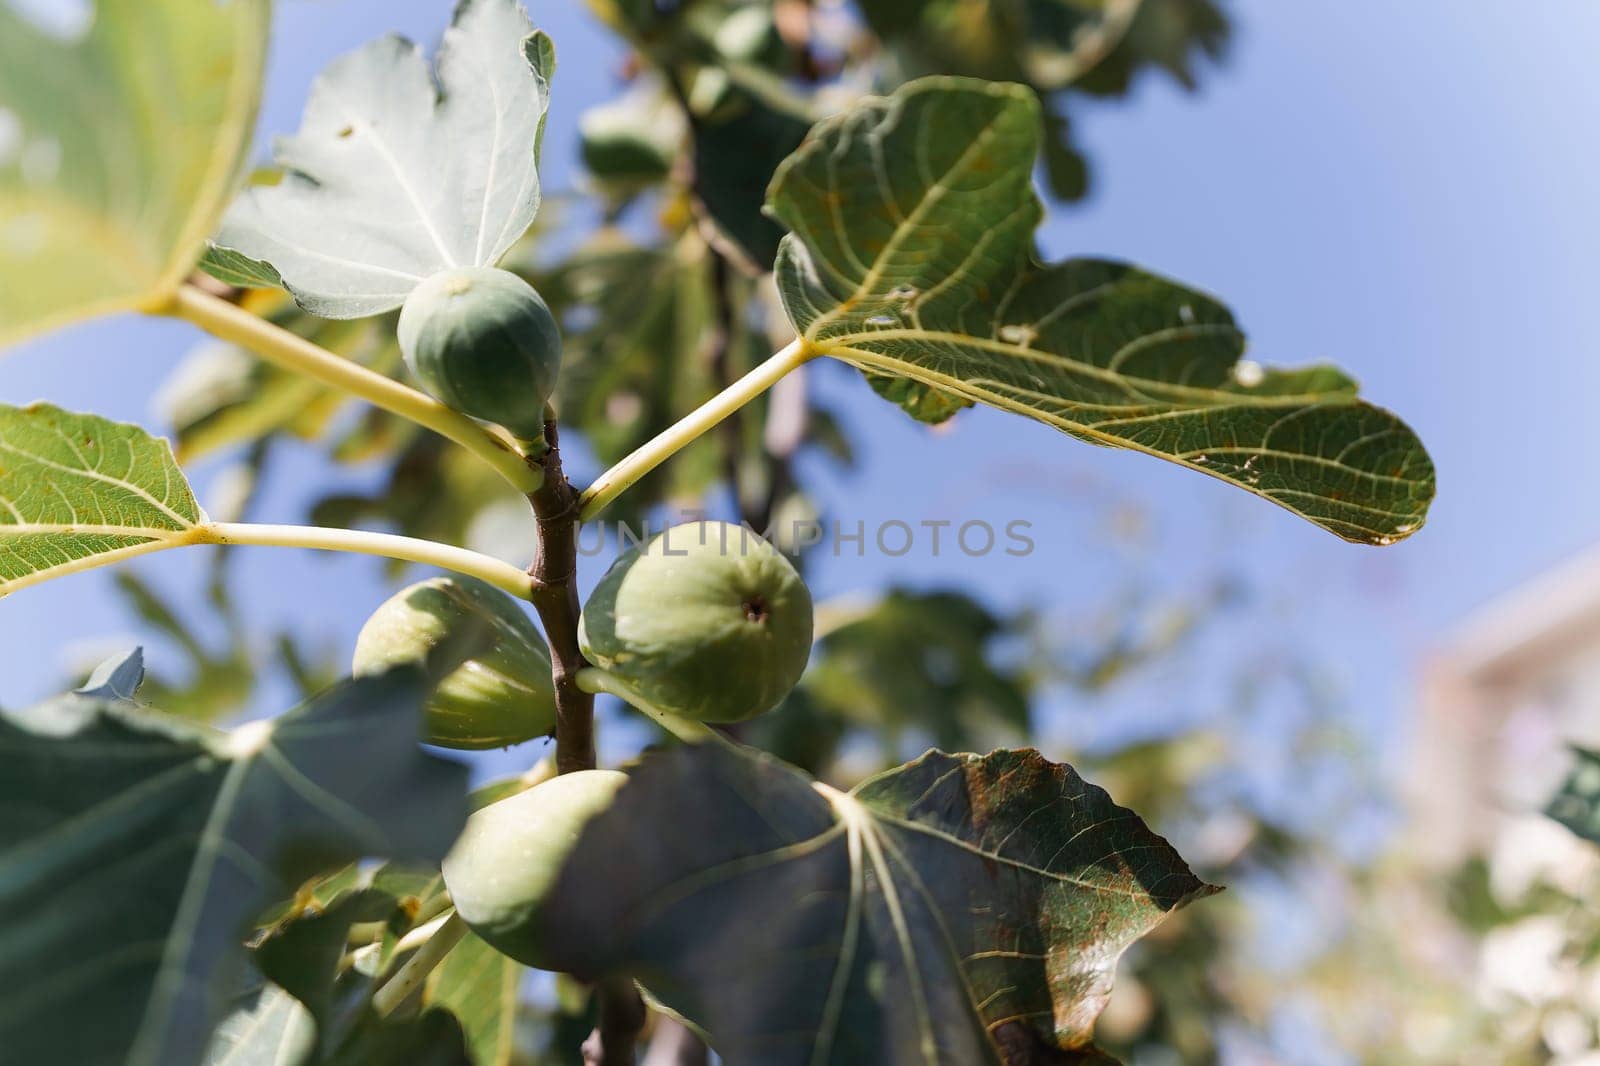 Figs with green leaves and small green fruits. The fruits are collected together on the branches. The sky is clear and blue